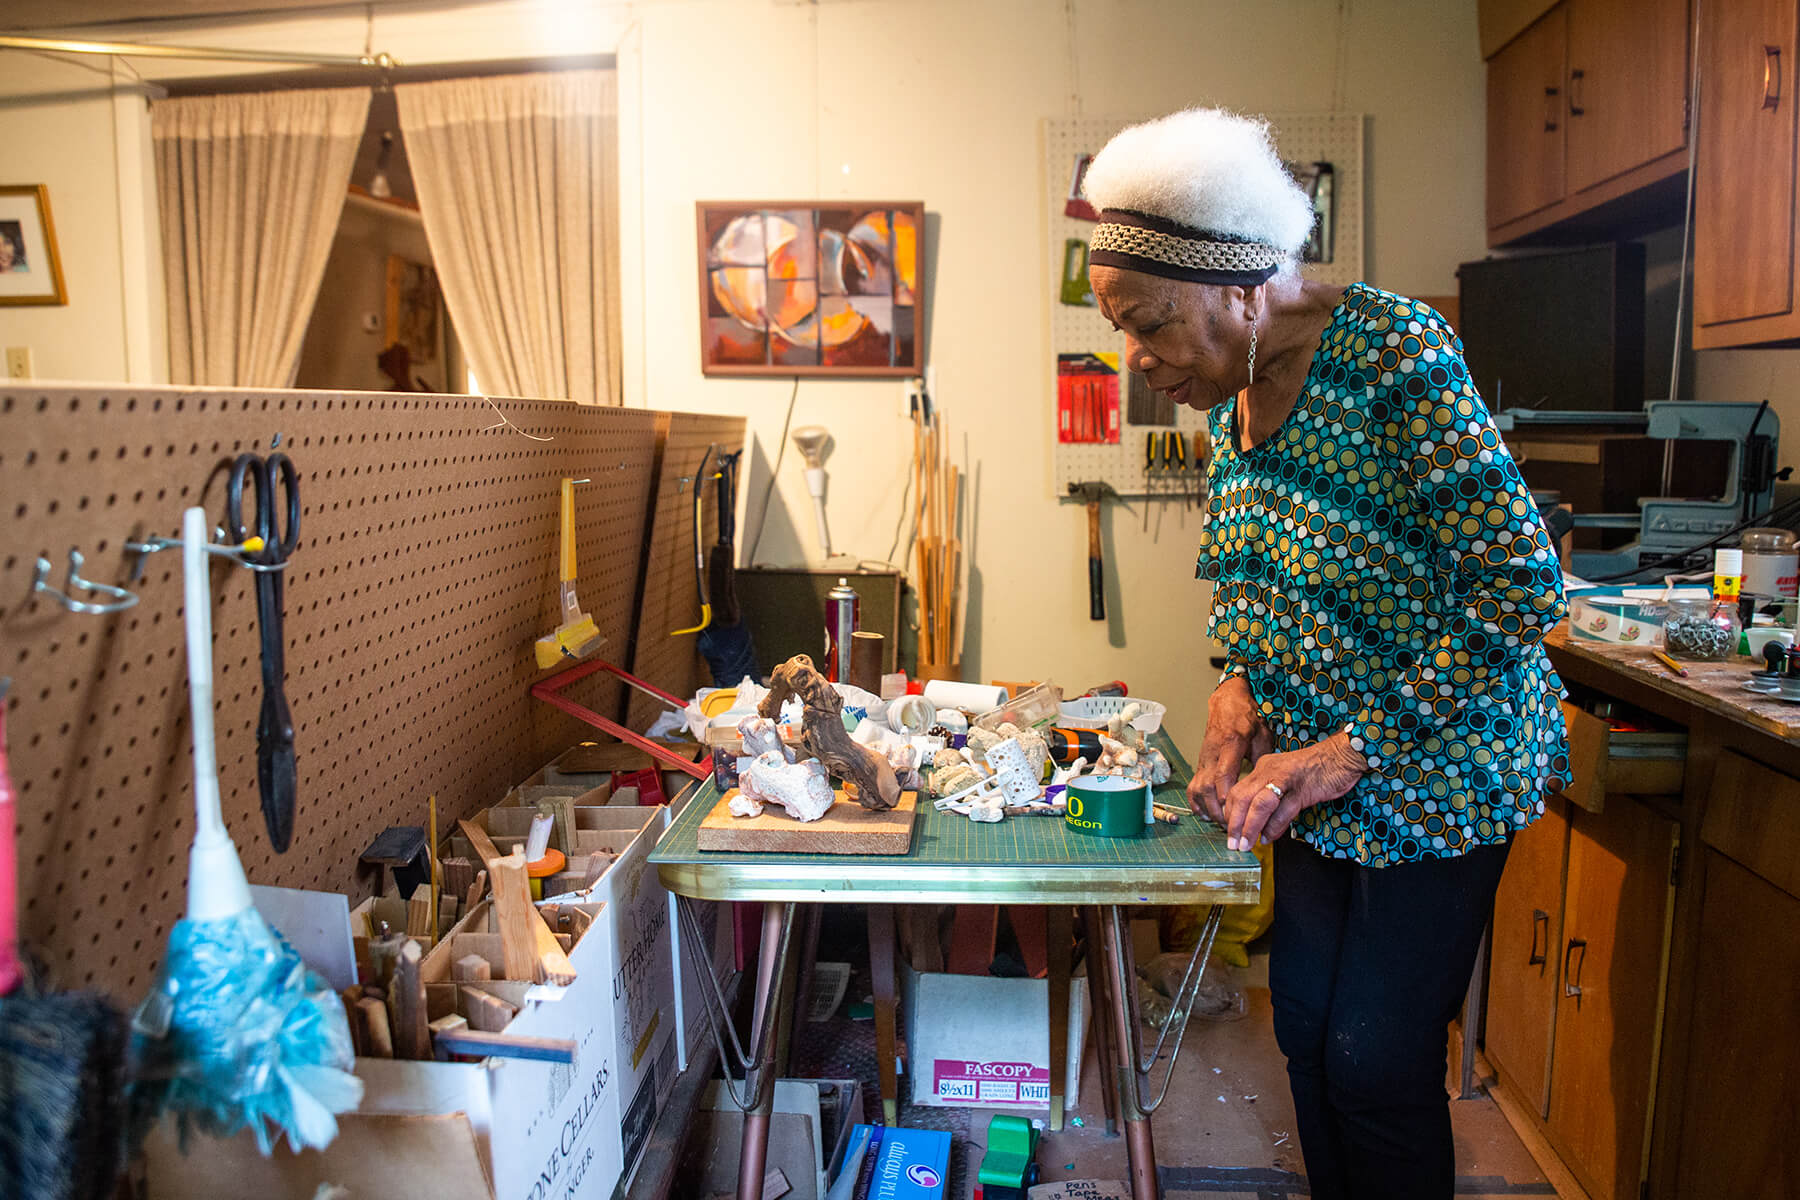 Elizabeth “Betty” Asche Douglas is an art-culture historian, retired professor, artist and jazz performer. Here she is pictured in her studio in Rochester, Pa.